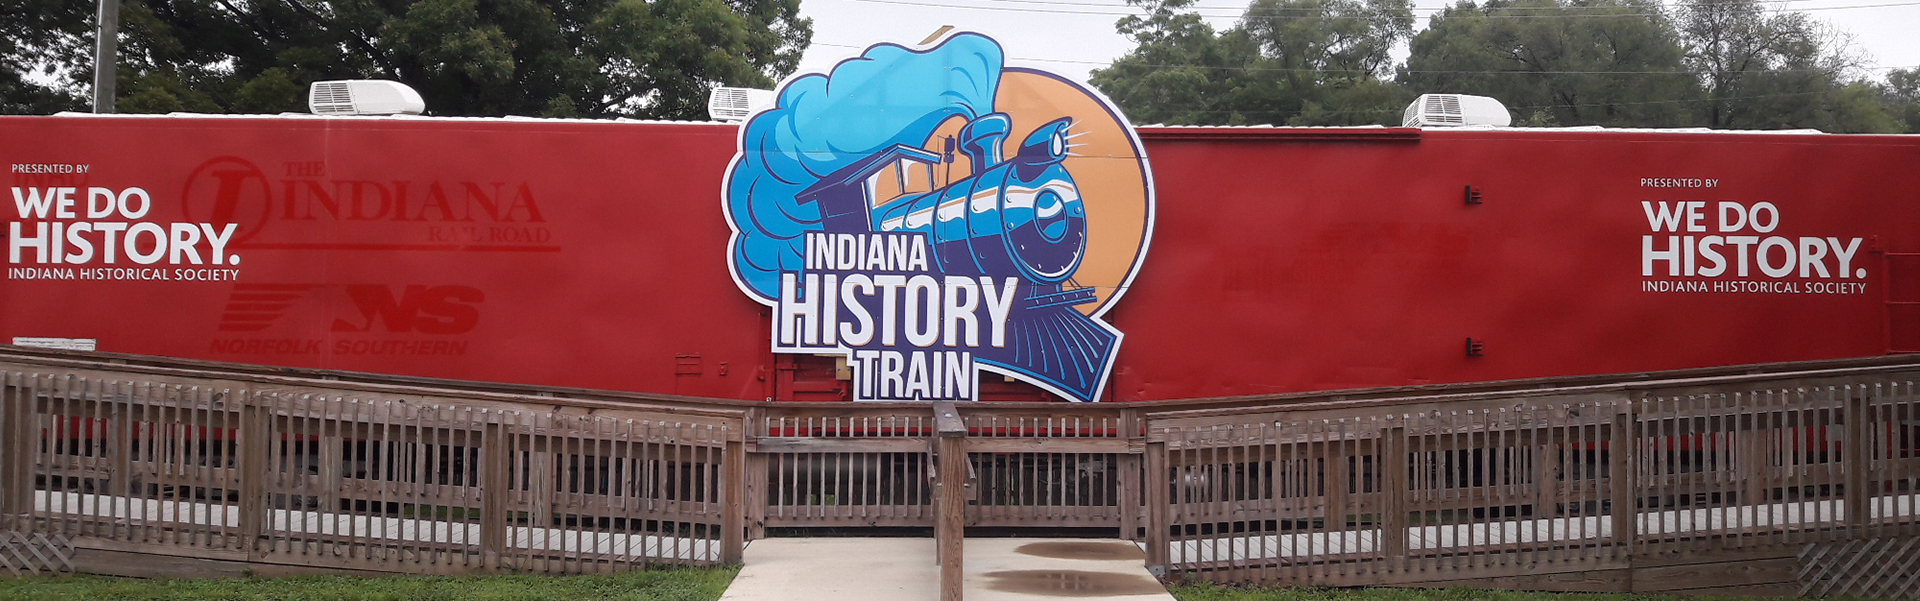 Shows the walk way and train cars at the Indiana State Fairgrounds